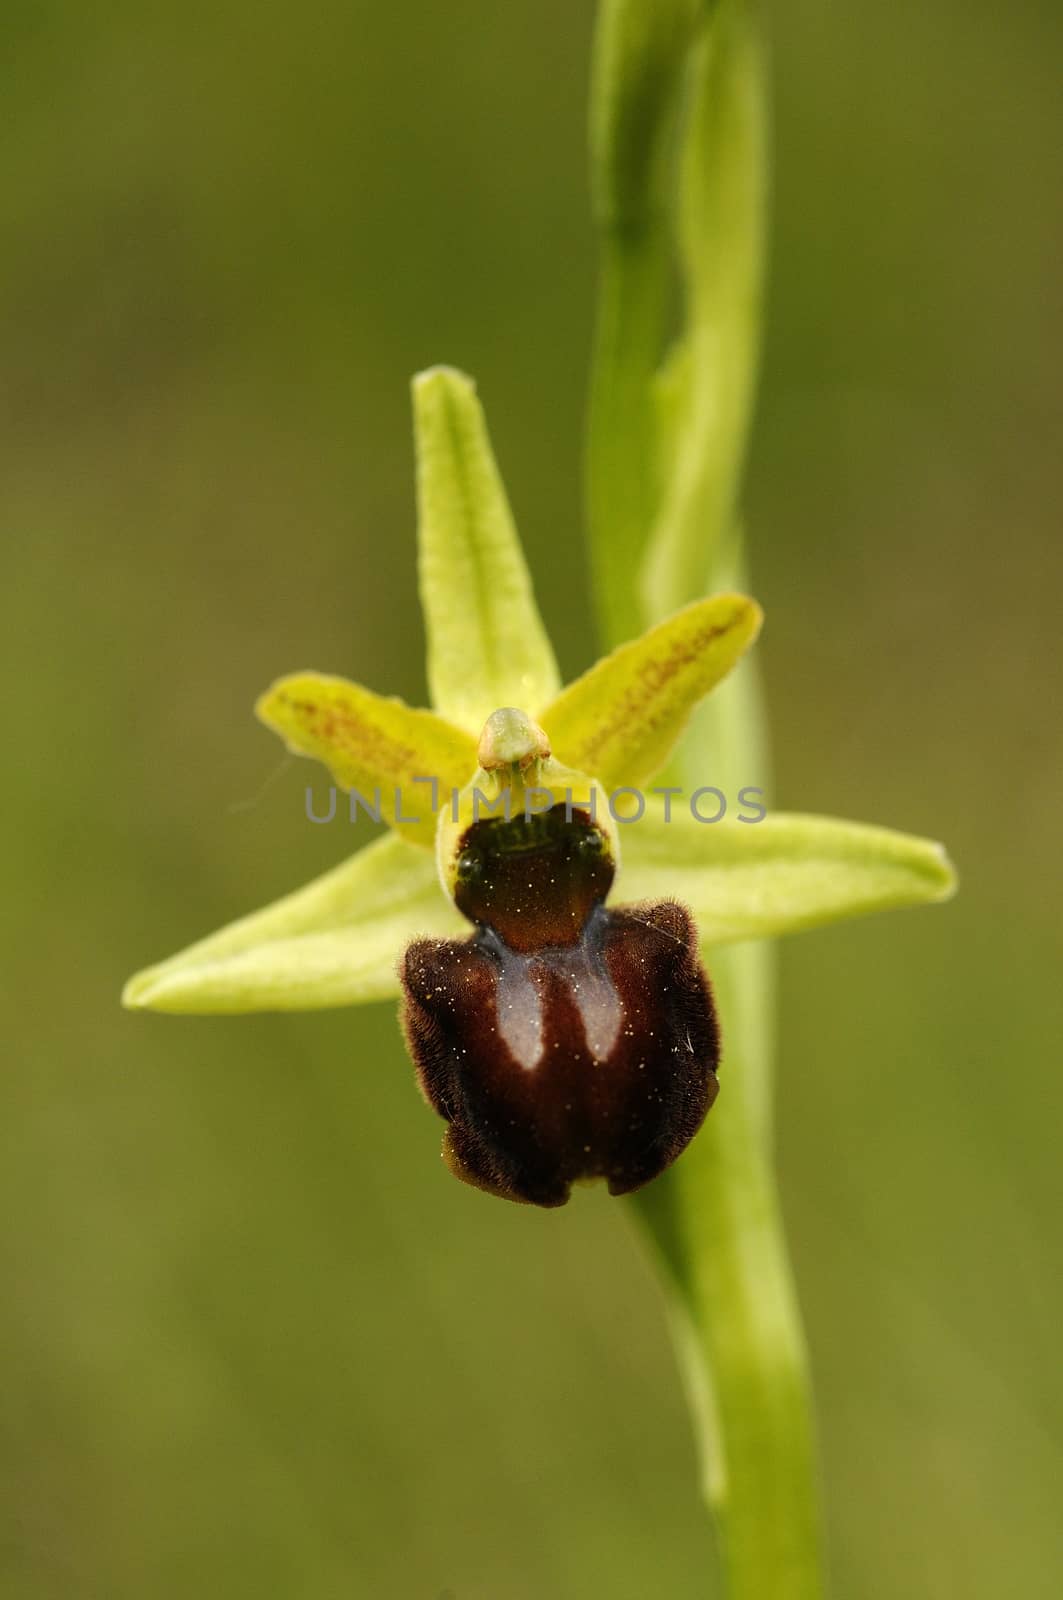 Early Spider Orchid - Ophrys sphegodes, detail of flowers